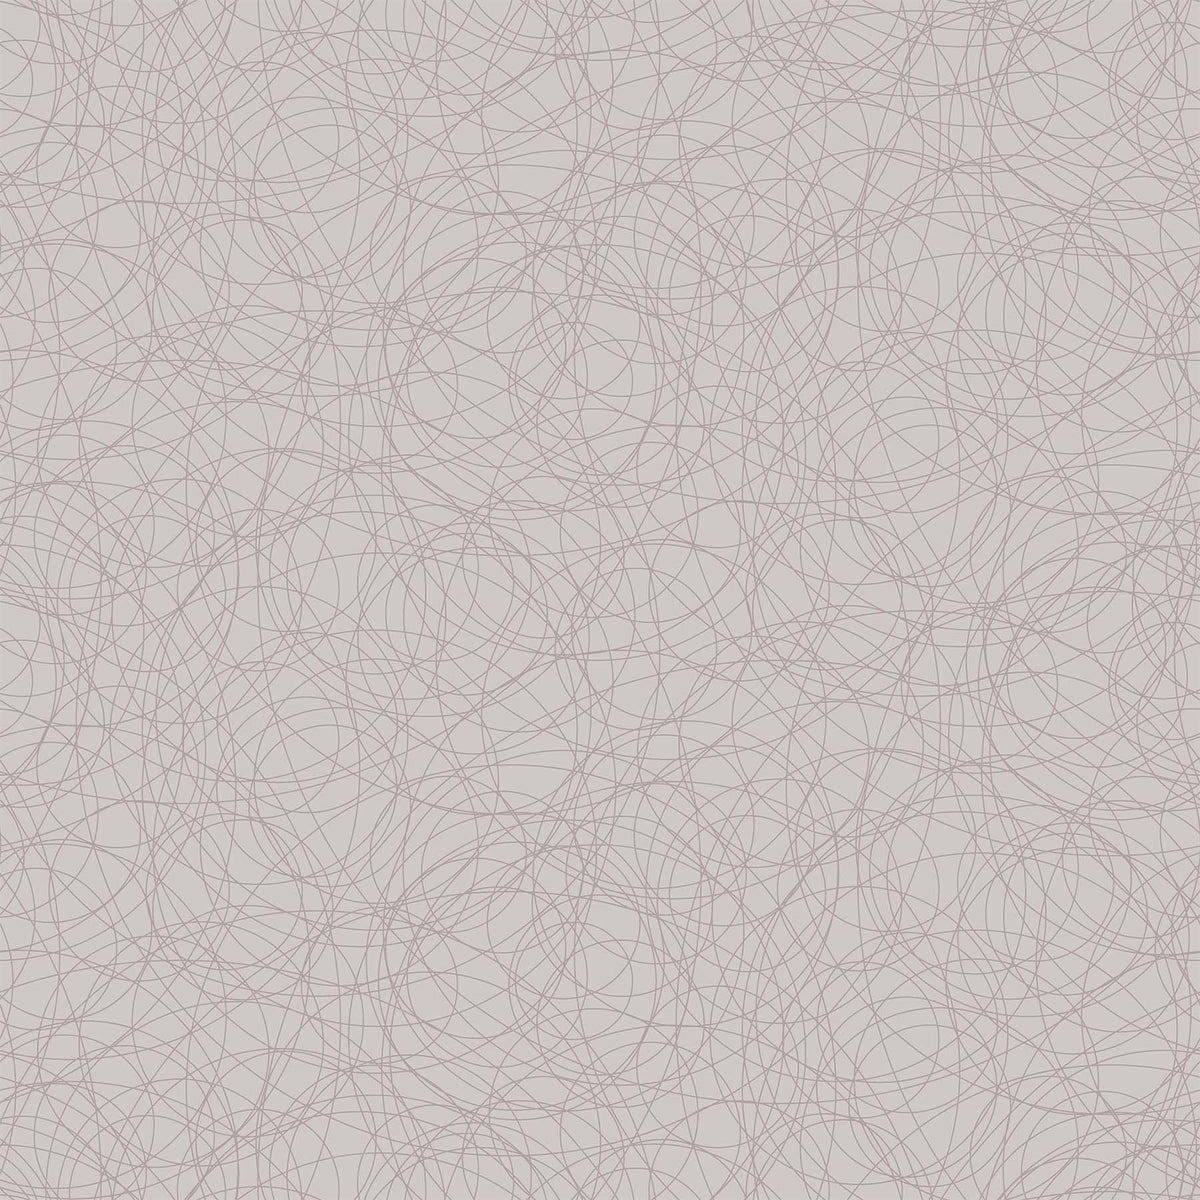 Neutrality Quilt Fabric - Round and Round in Gull - 10292-91